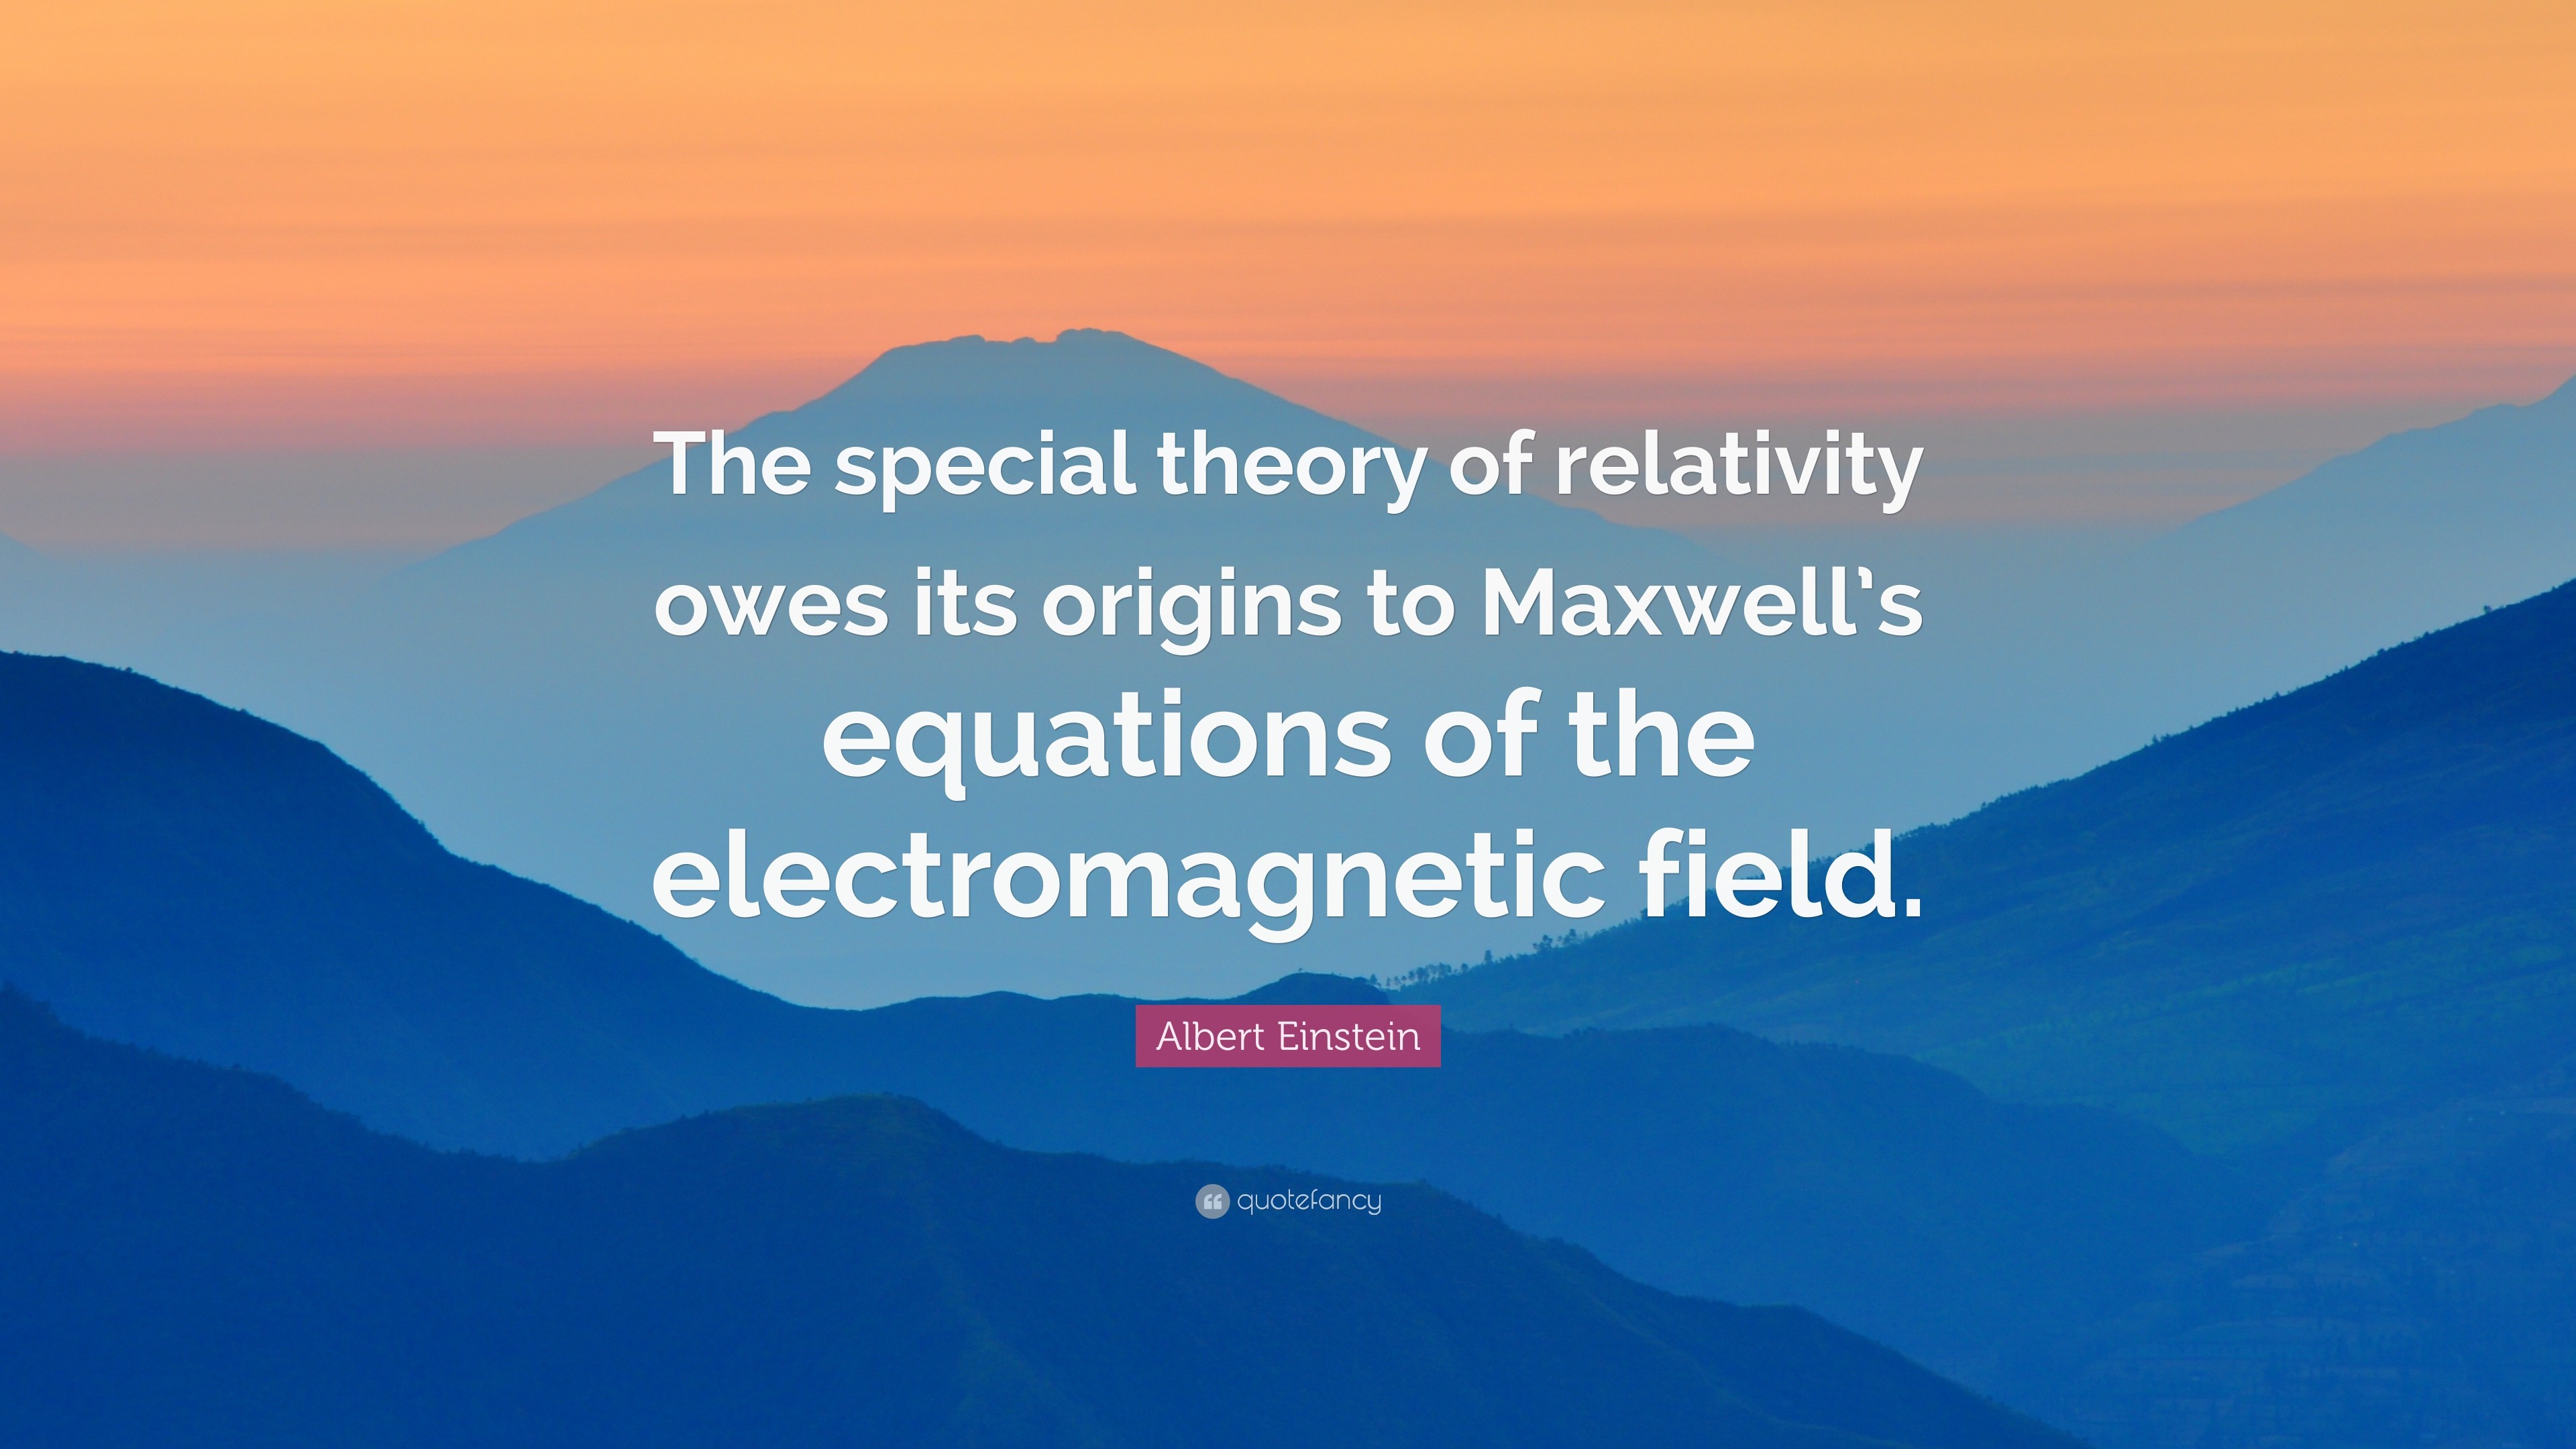 3840x2160 Albert Einstein Quote: “The special theory of relativity owes its origins  to Maxwell's equations